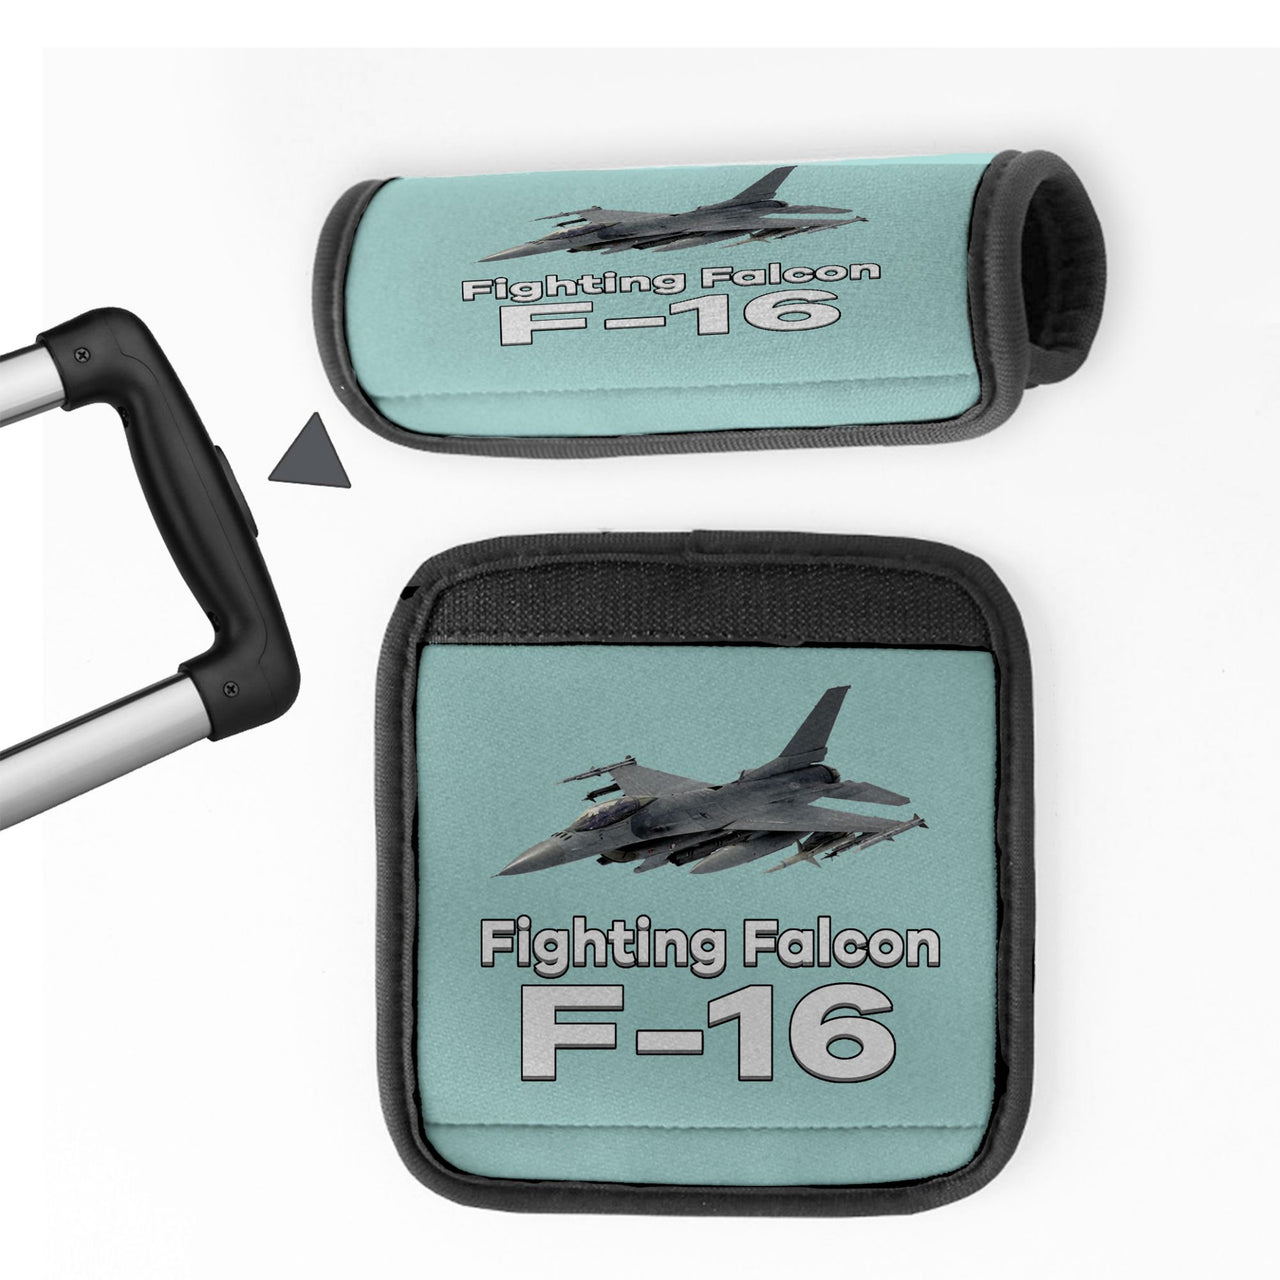 The Fighting Falcon F16 Designed Neoprene Luggage Handle Covers